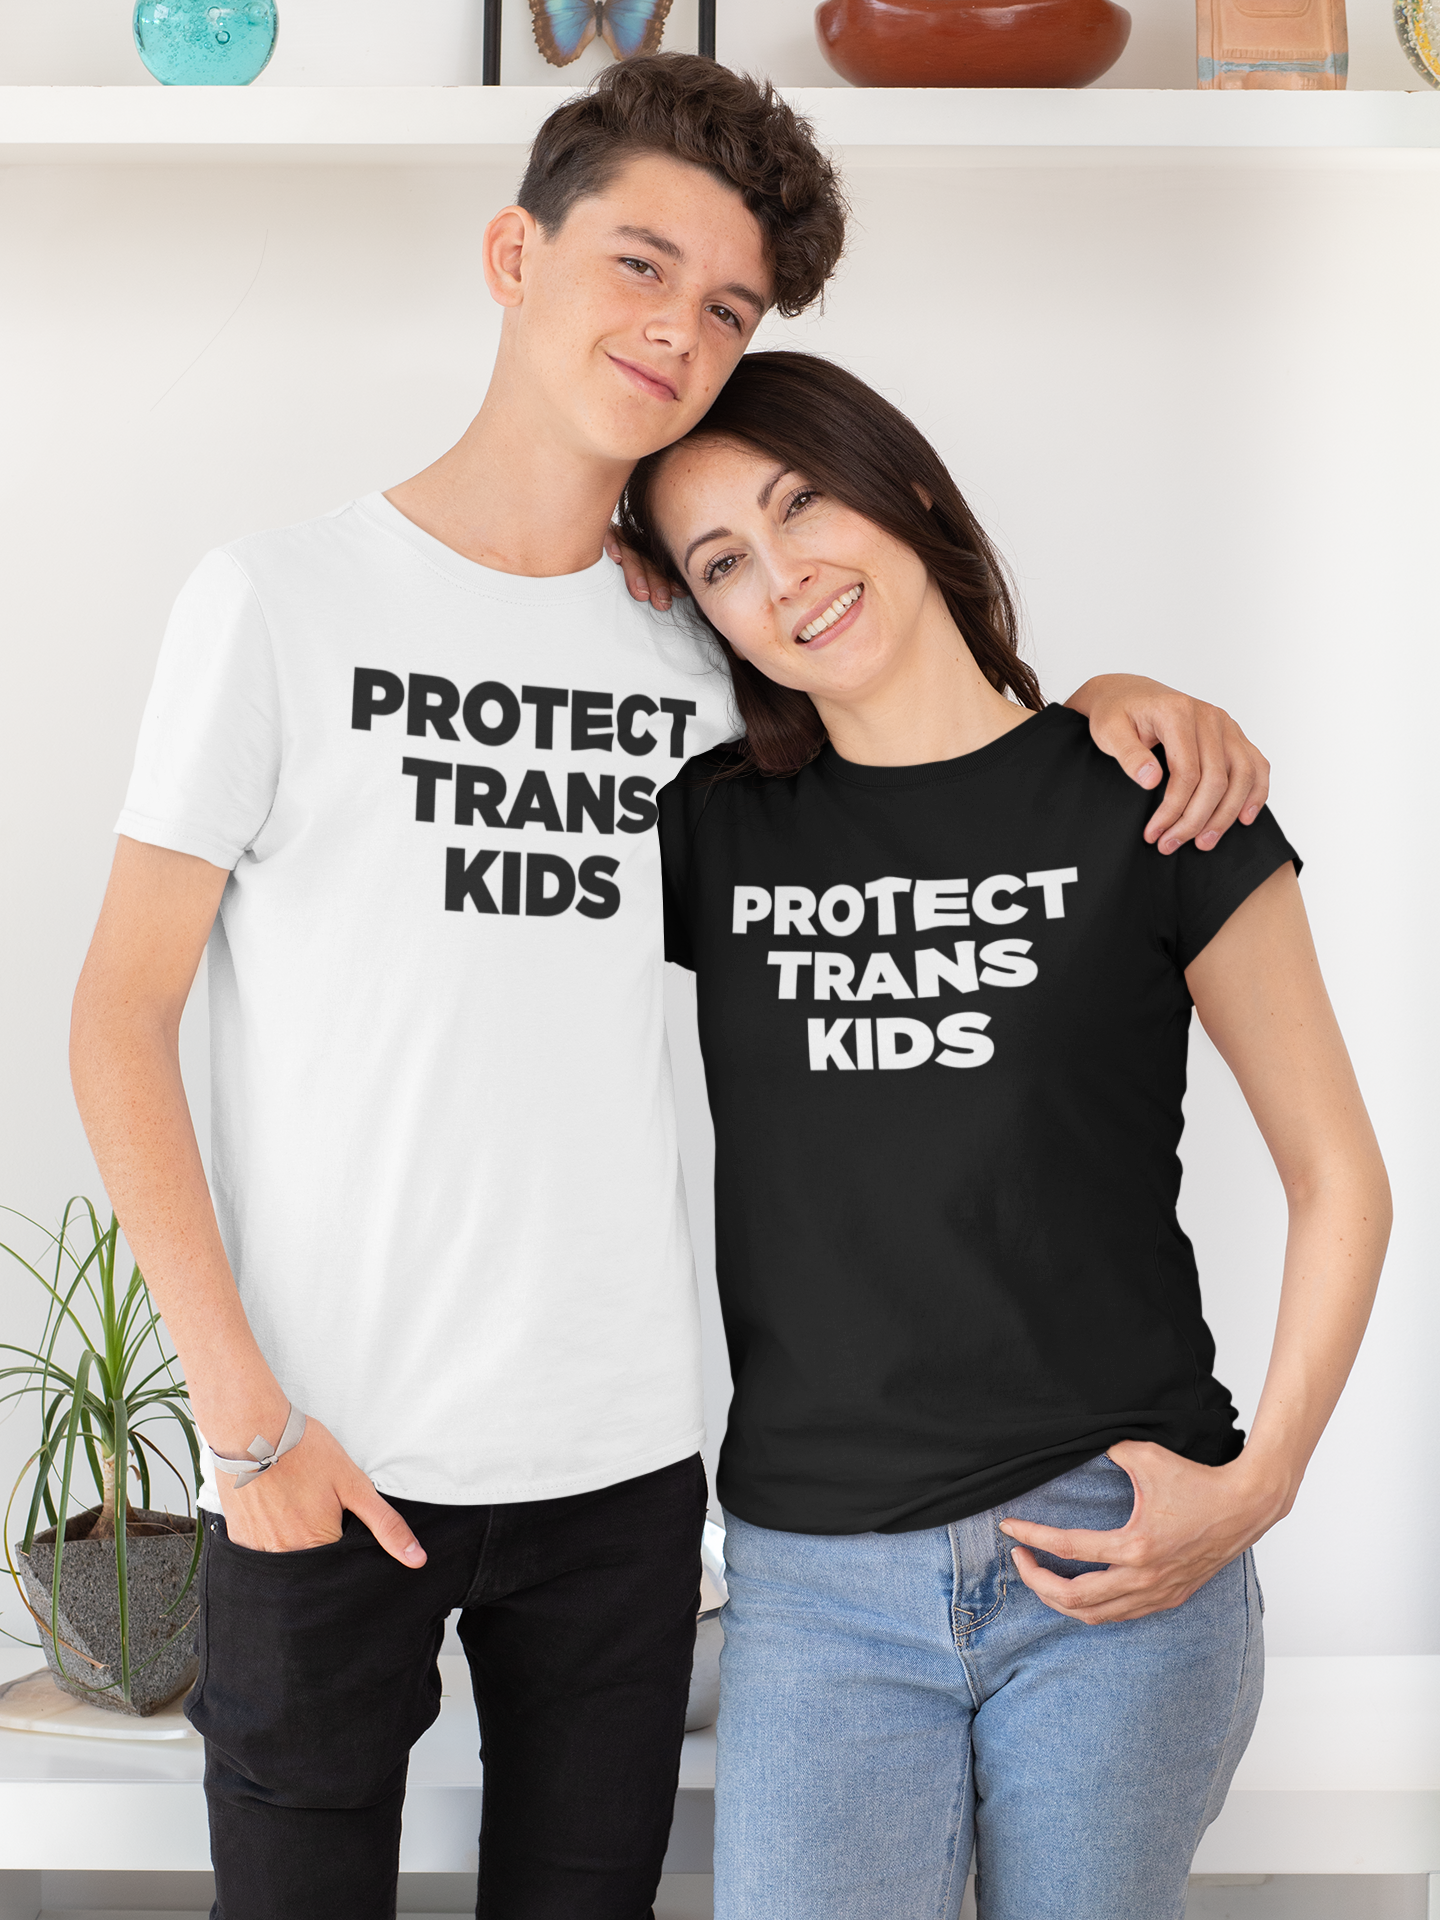 Protect Trans Kids t-shirt with child and mom